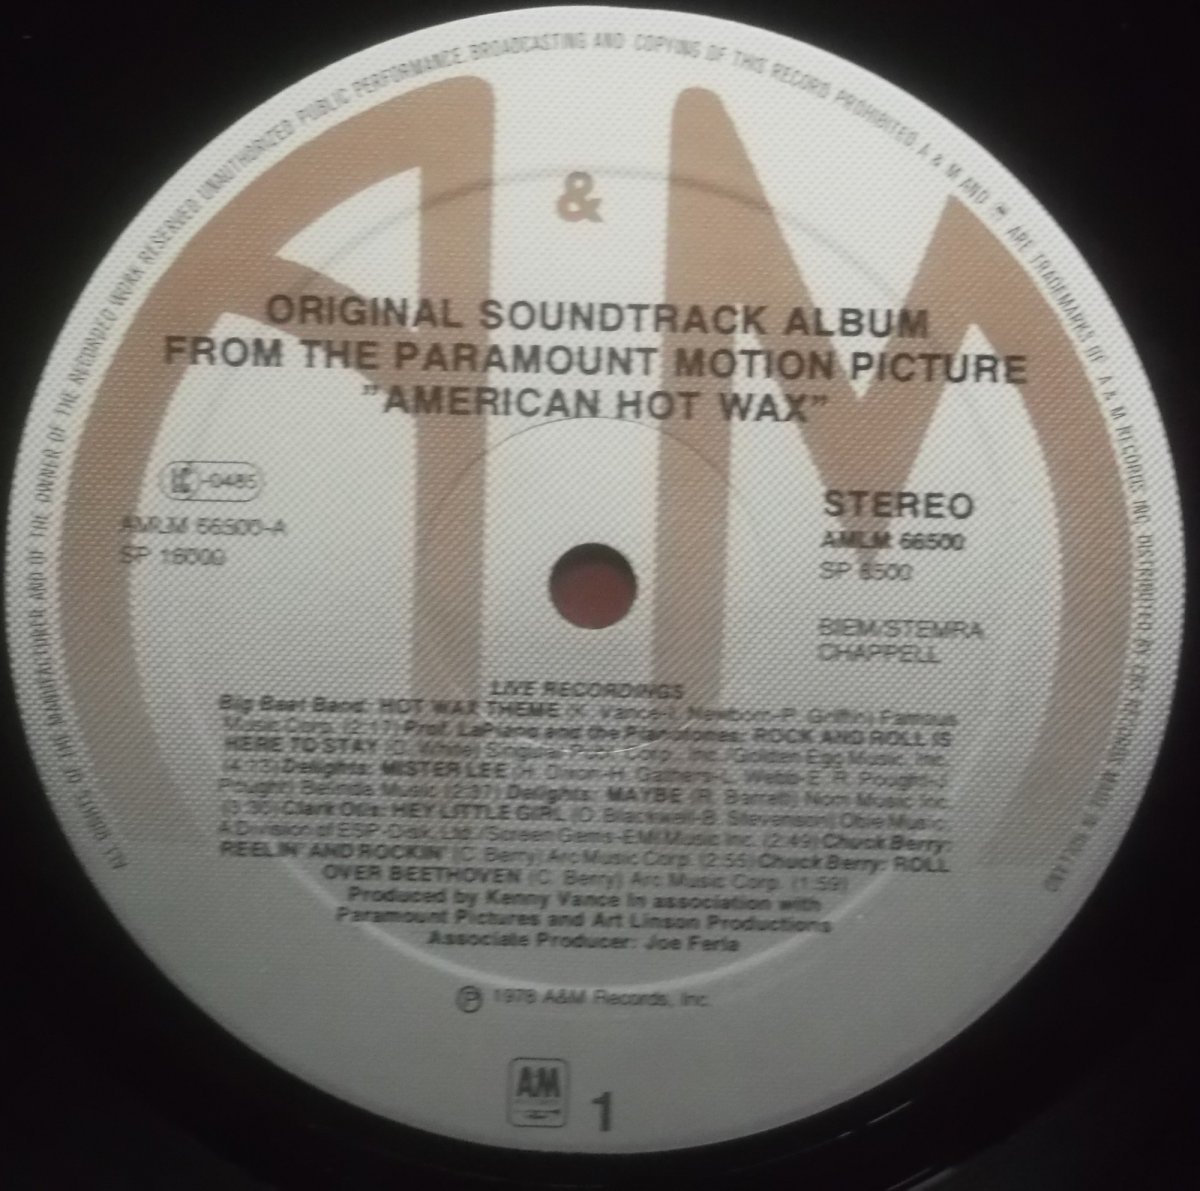 The Original Soundtrack Album From The Paramount Motion Picture American "Hot Wax" 2xLP